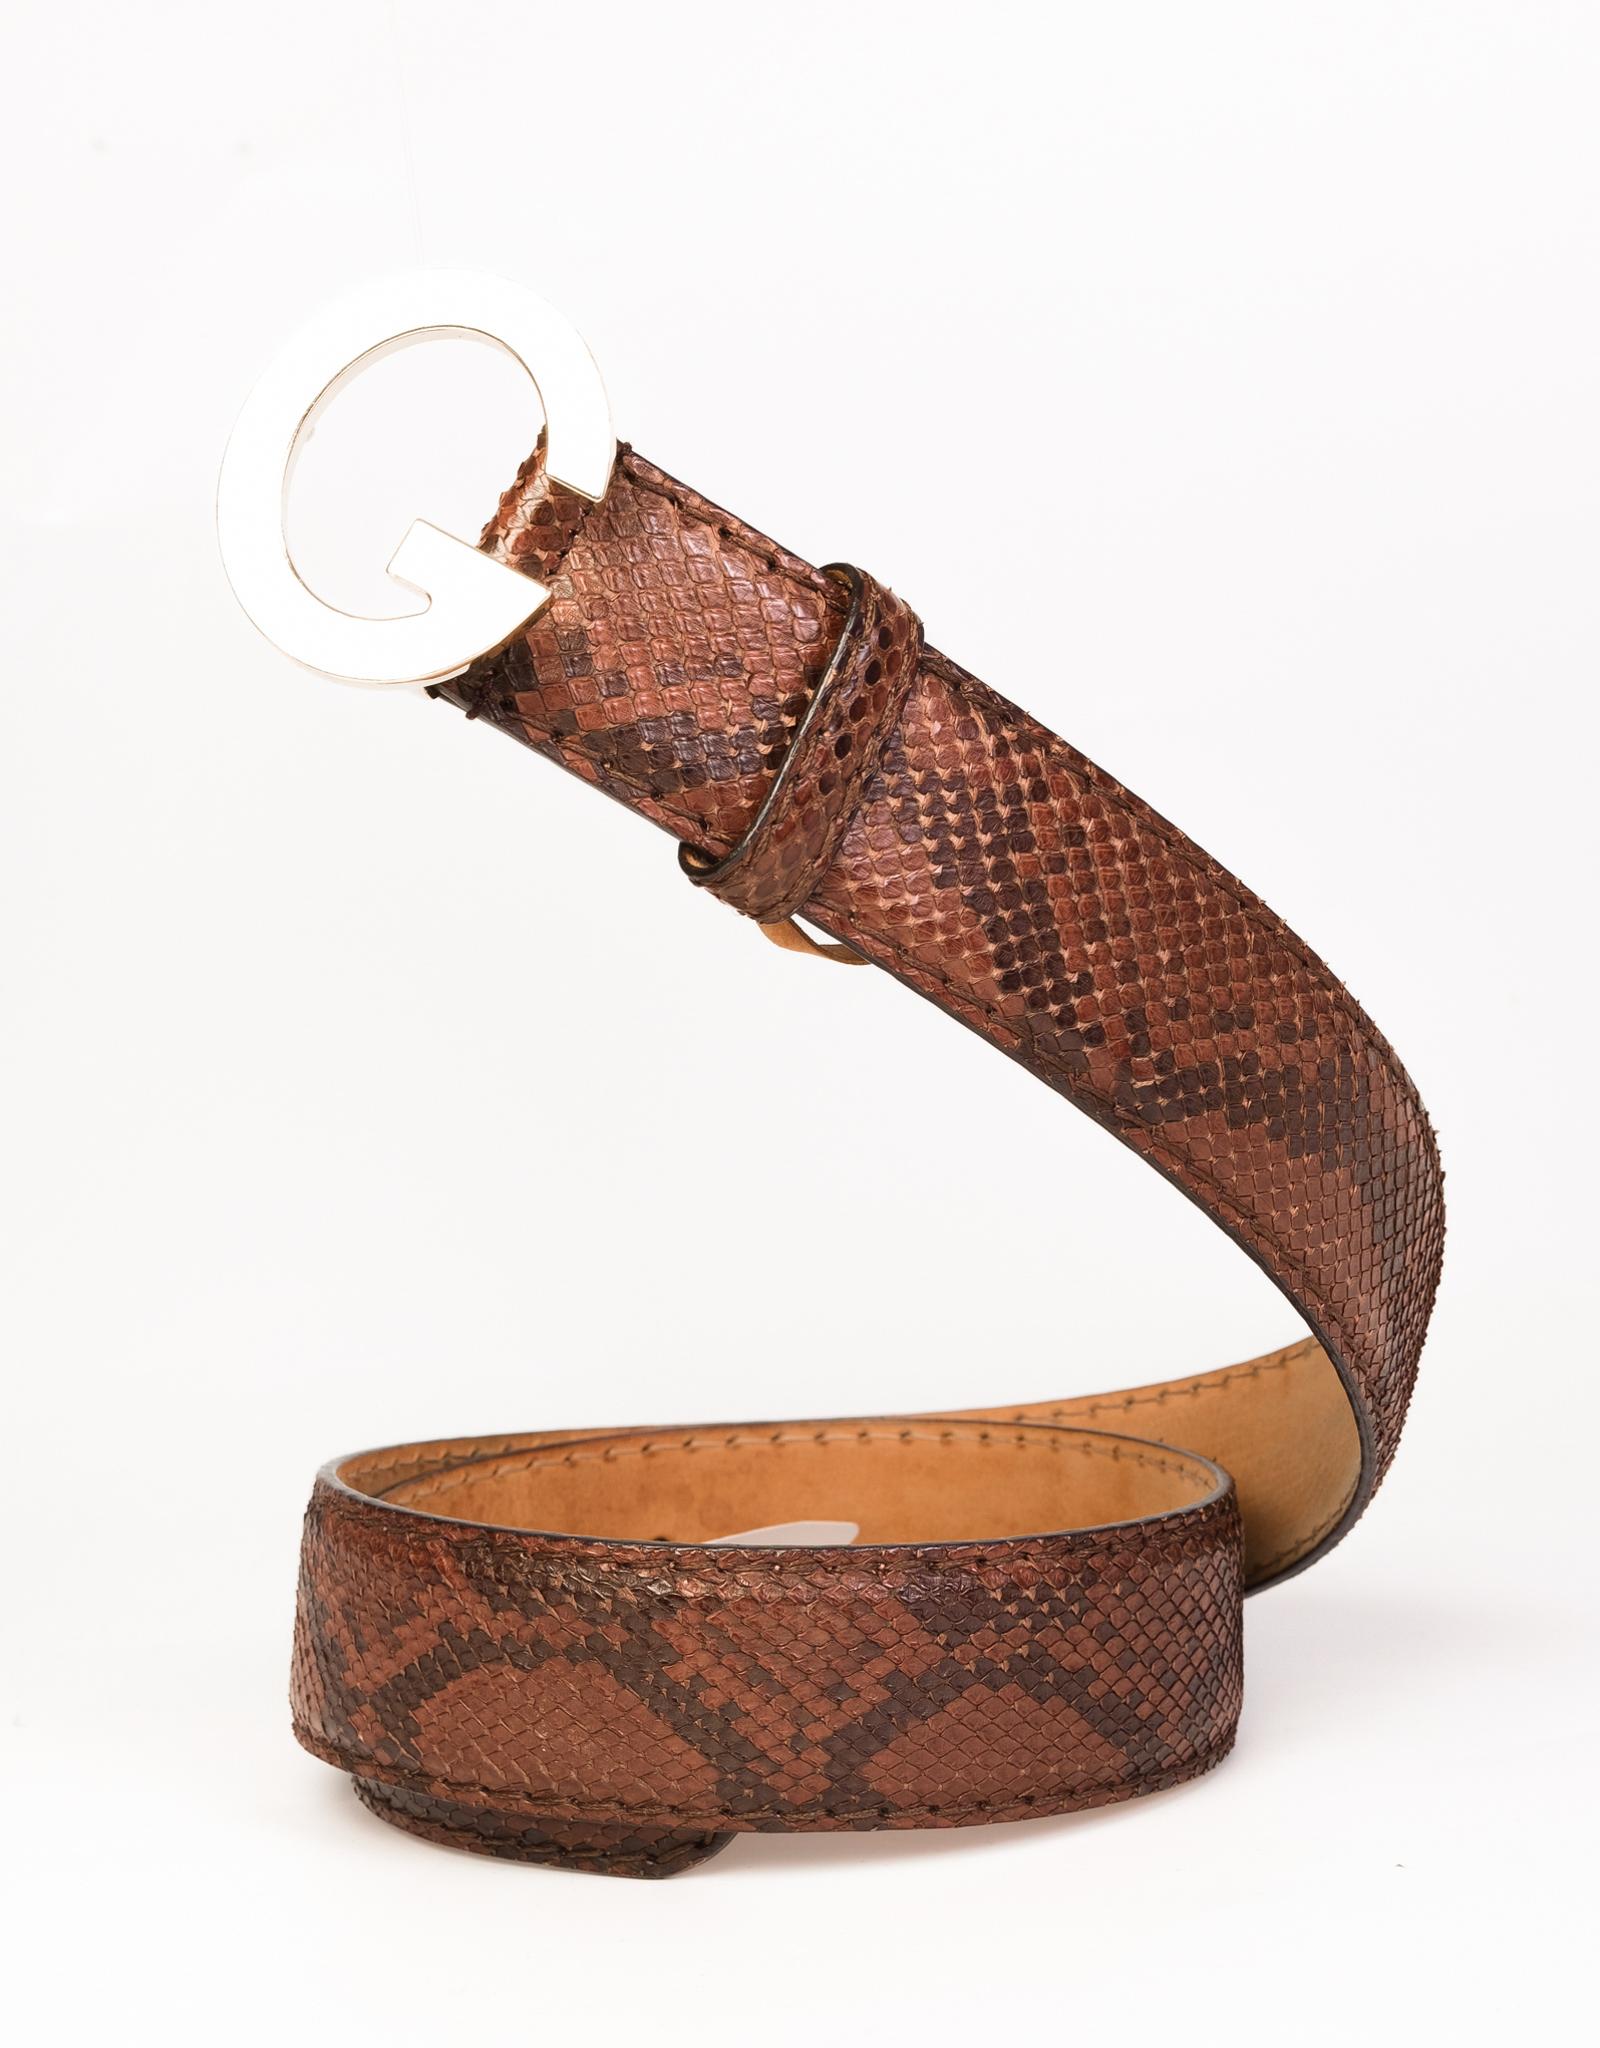 2-tones python Gucci vintage belt with a rare single G buckle in gold tone brass. Inside is genuine leather.

COLOR: Brown - python
ITEM CODE: 203742.497717
MATERIAL: Leather python
MEASUREMENTS: L 37” x W 1”
SIZE:  85.34
EST. RETAIL: $850
COMES